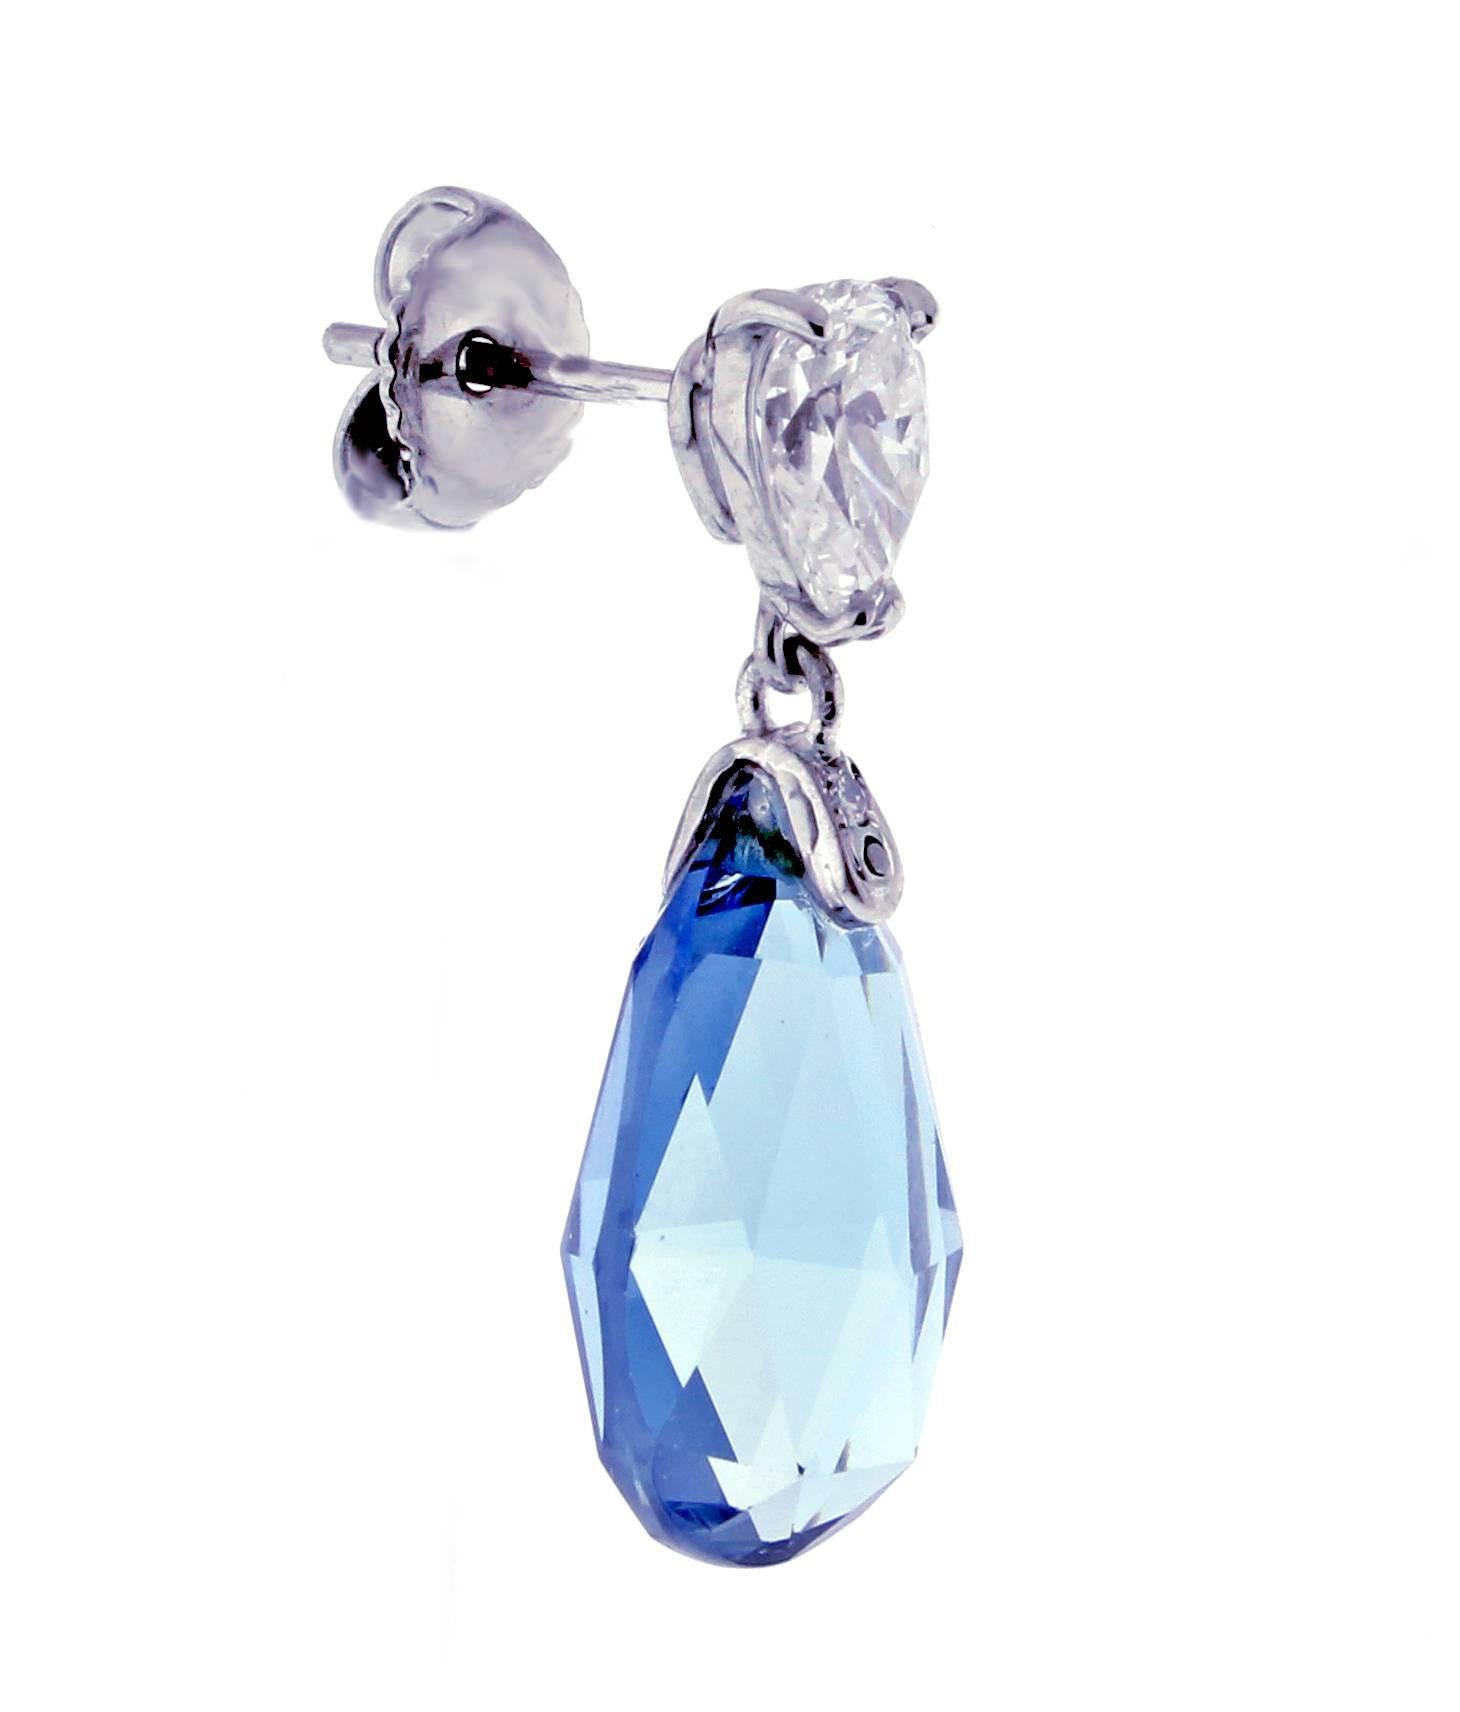 From Pampillonia a magnificent pair of  Santa Maria aquamarine briolettes and  pear-shape diamond earrings.   The two aquamarine briolettes weigh 10 carats, the two pear shape diamonds weigh 1.28 carat. D Color, VS1 clarity. The earring measure one